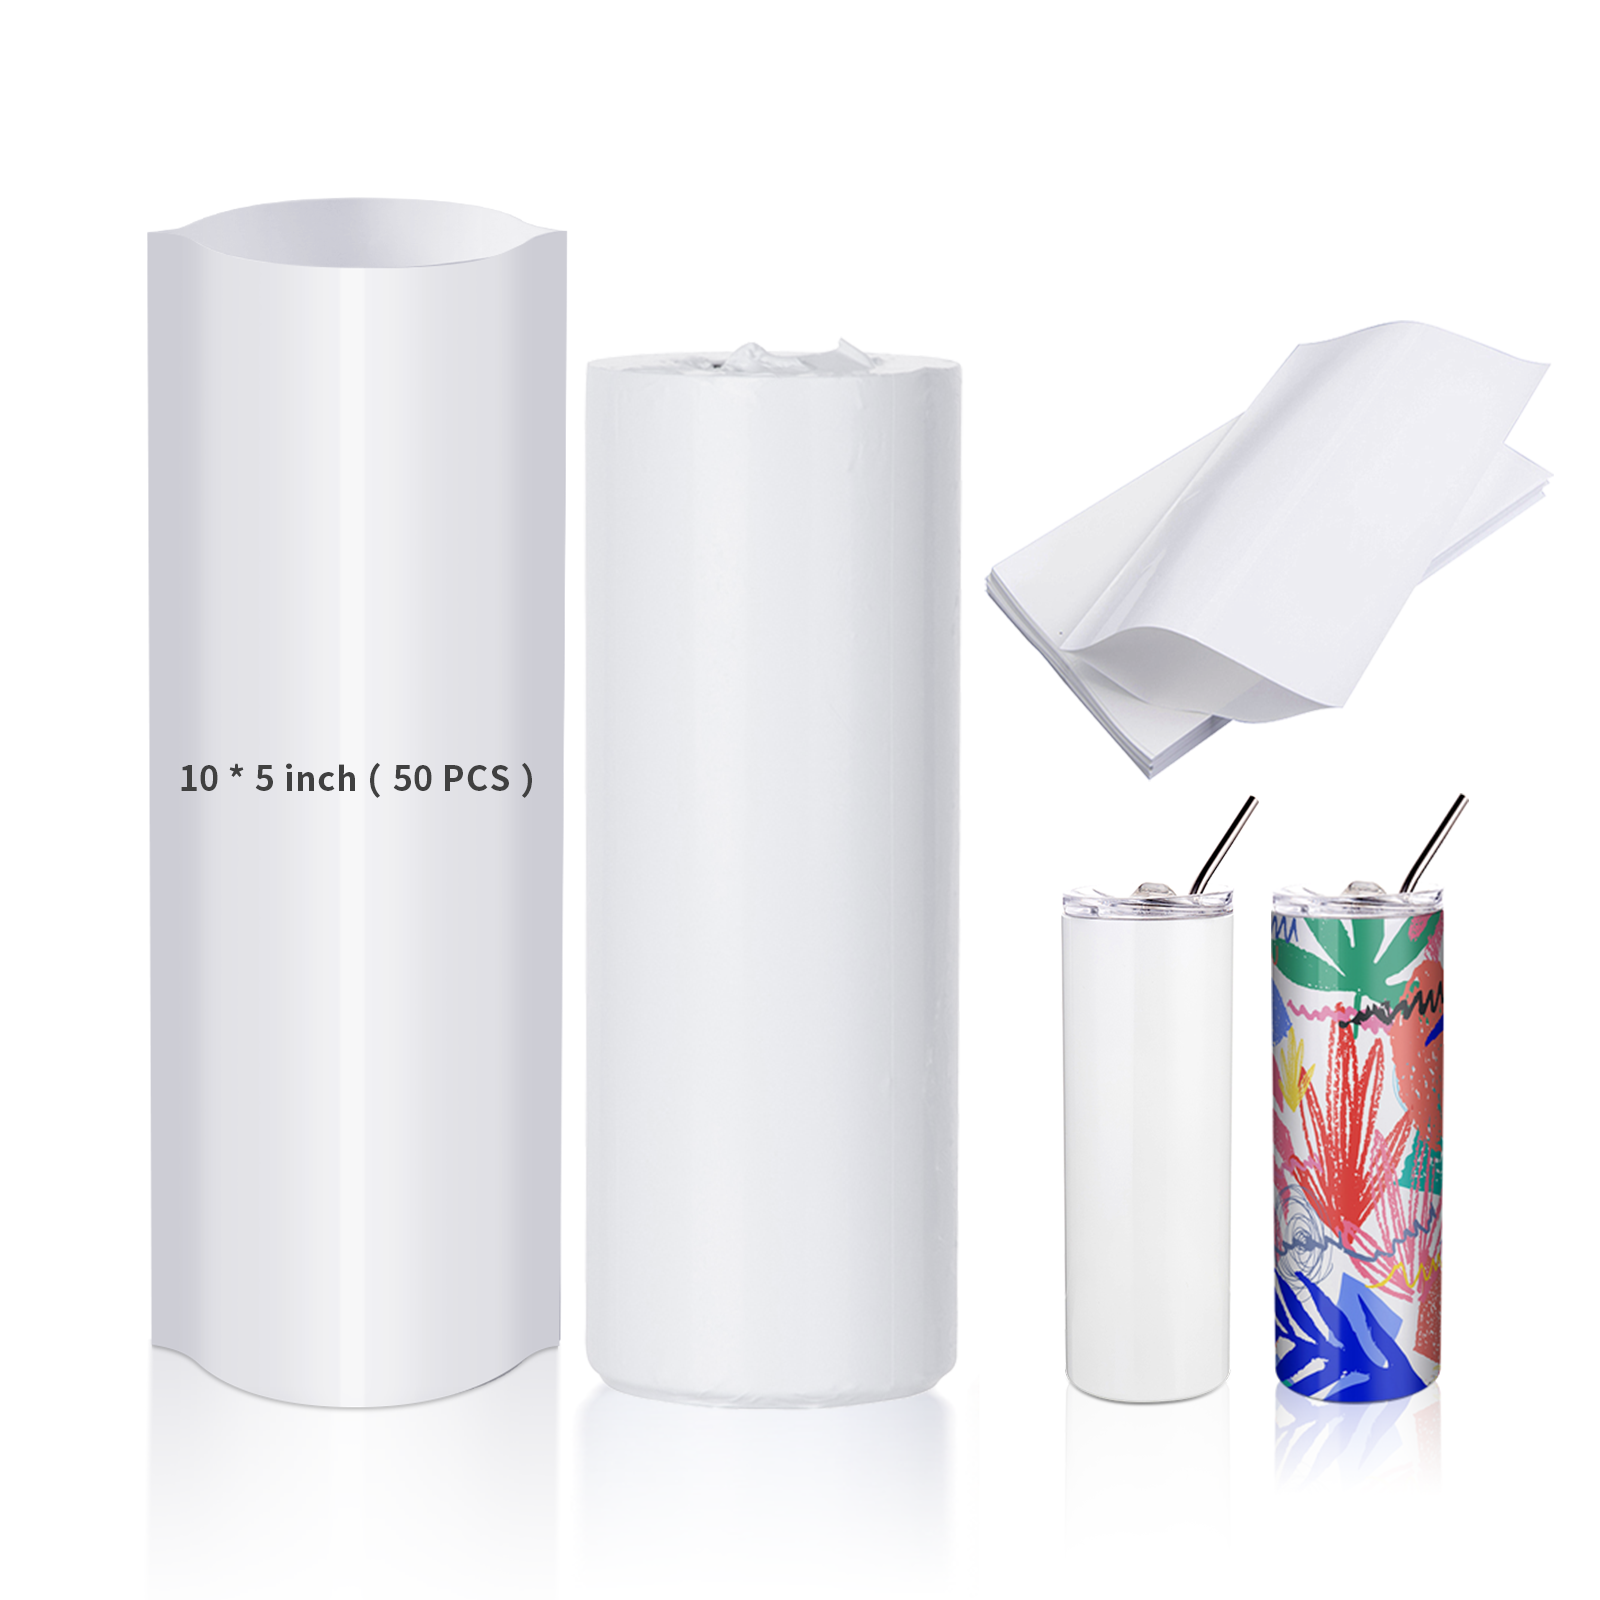 Morepack Sublimation Shrink Wrap Sleeves,5x10 inch White Sublimation Heat Transfer Shrink Film Bags for Mugs,Cups,Tumblers,Blanks,Shrink Wrap Bands